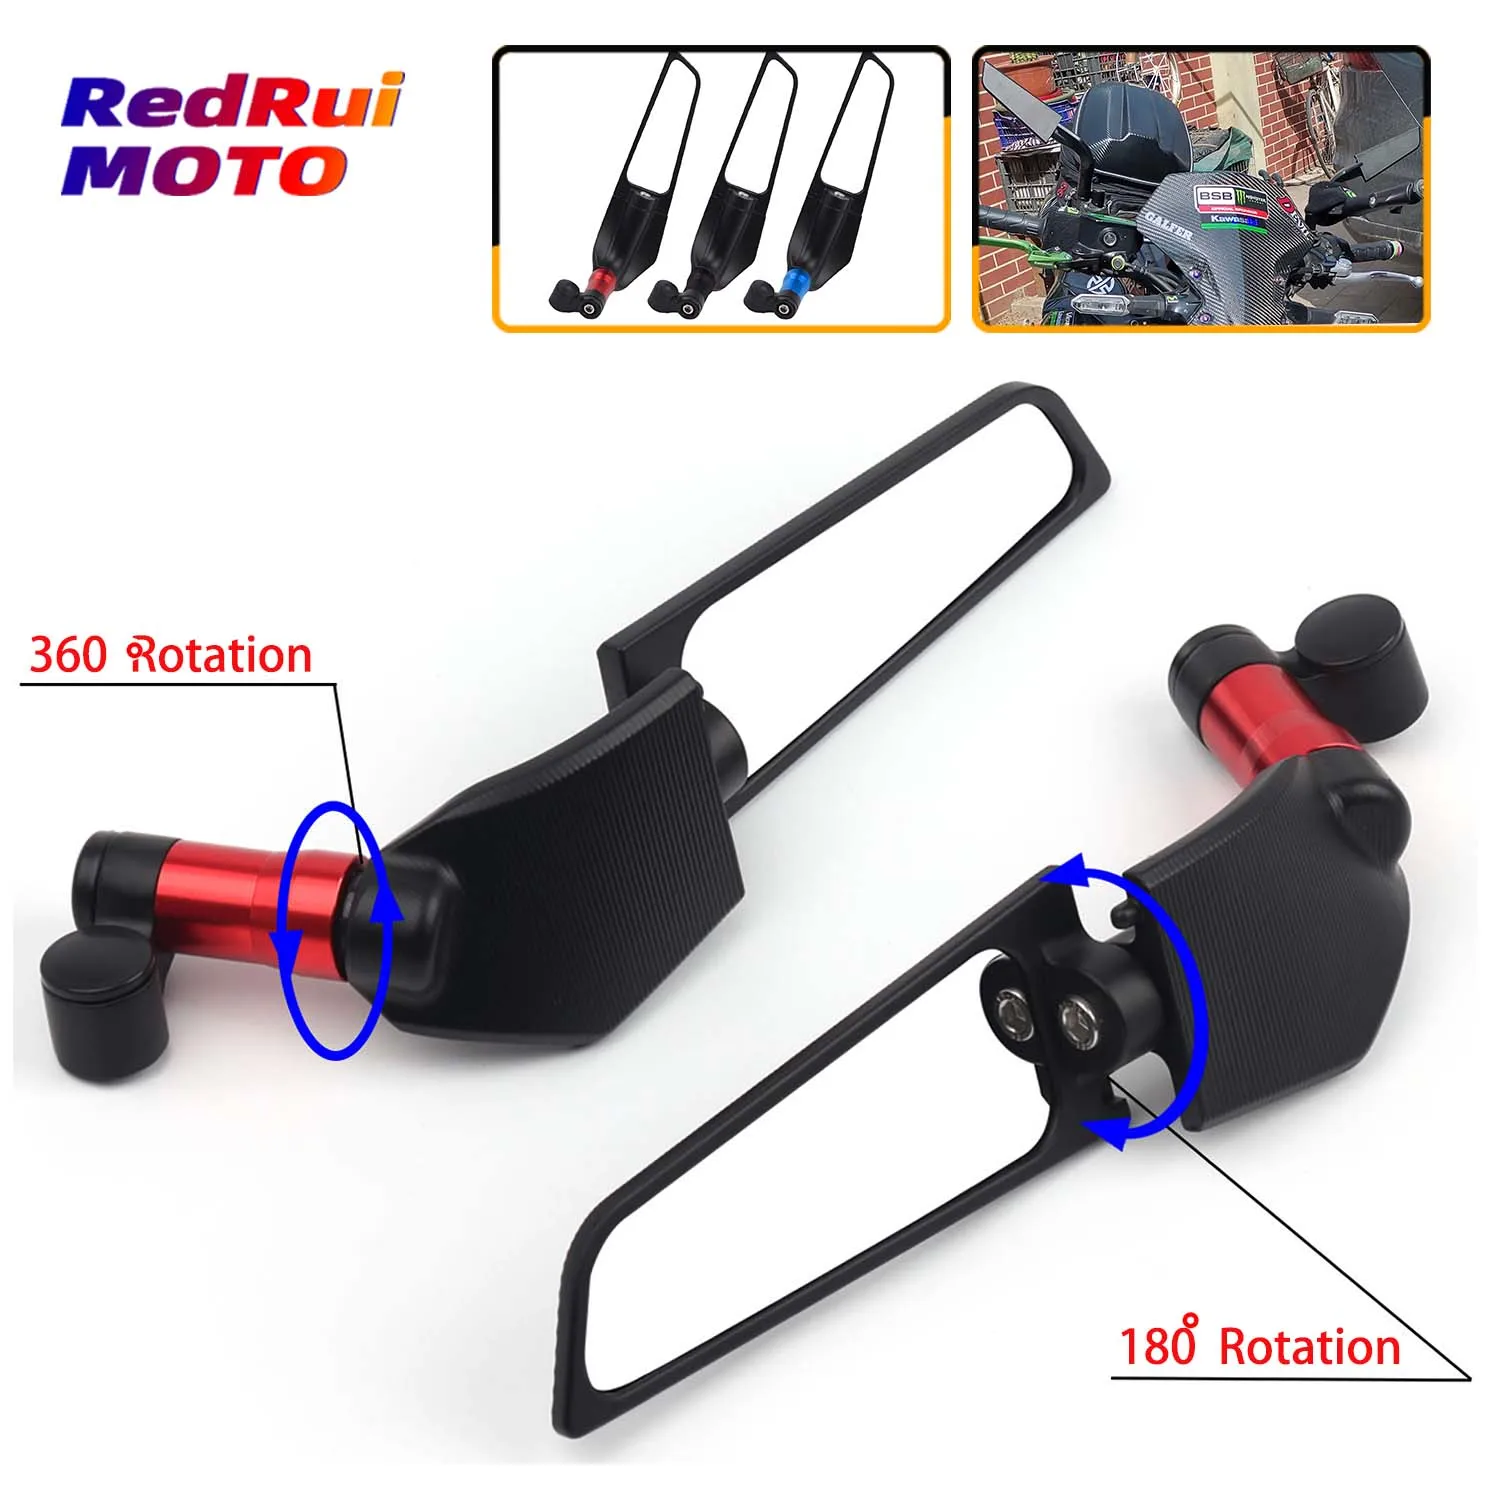 

Universal New fixed wind wing for Yamaha TRACER 900GT 700GT 155 TENERE 700 FAZER motorcycle Rotating rearview mirror